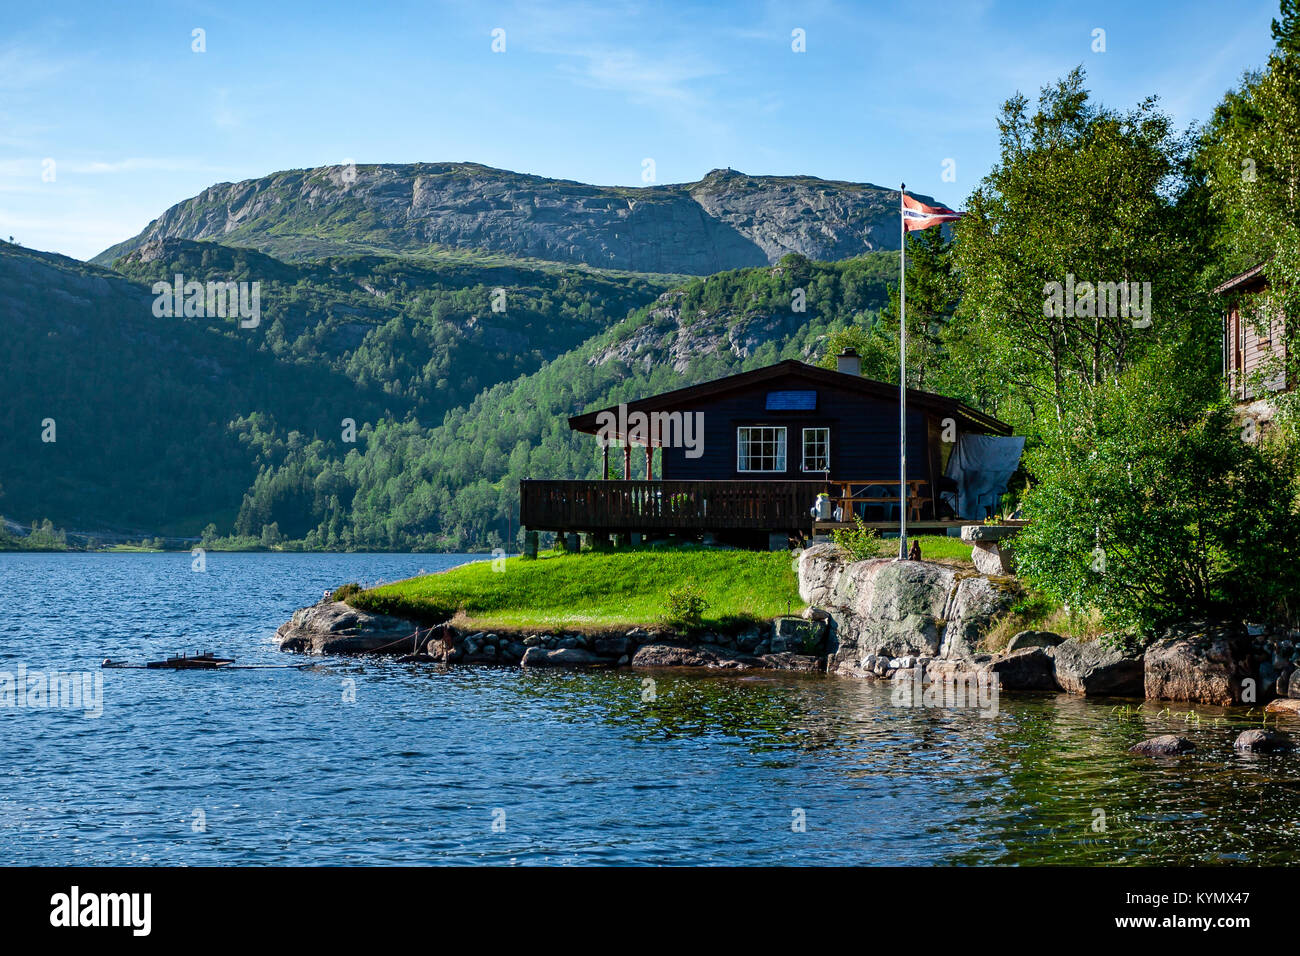 Norwegian wooden house build by the fjord with the scenic mountain view in the background. Norwegian flag. Blue sky. Idyllic location Stock Photo